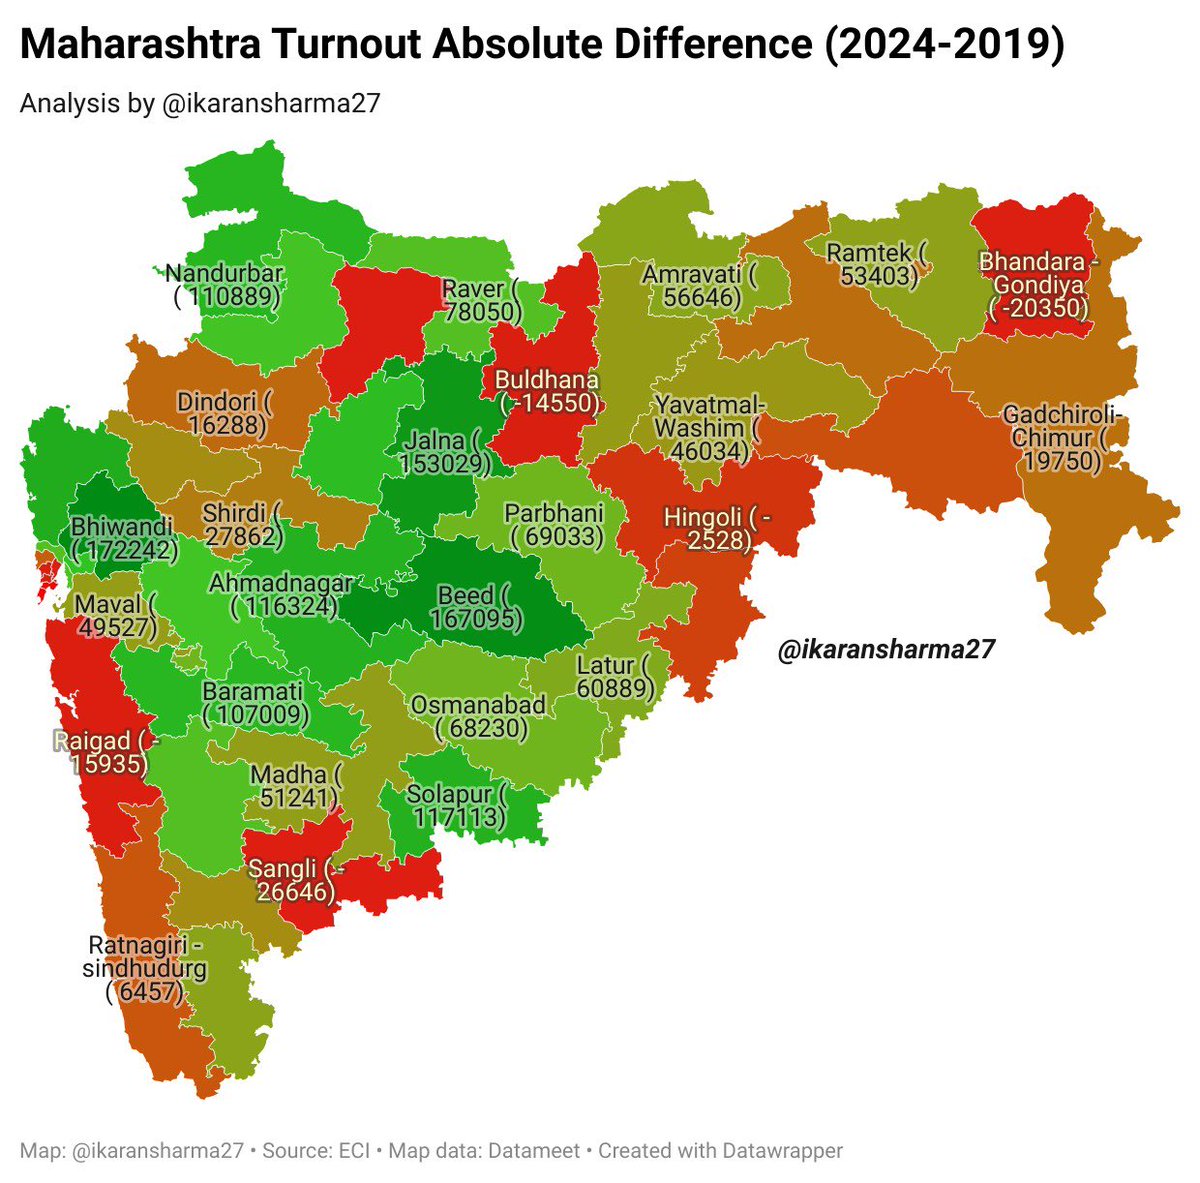 Percentage changes in voter turnout between the 2019 and 2024 elections can be misleading. Take the case of Maharashtra, while 26 seats show a decrease in turnout percentage, the actual number of seats with fewer voters is only 12. This is due to the growing electoral roll every